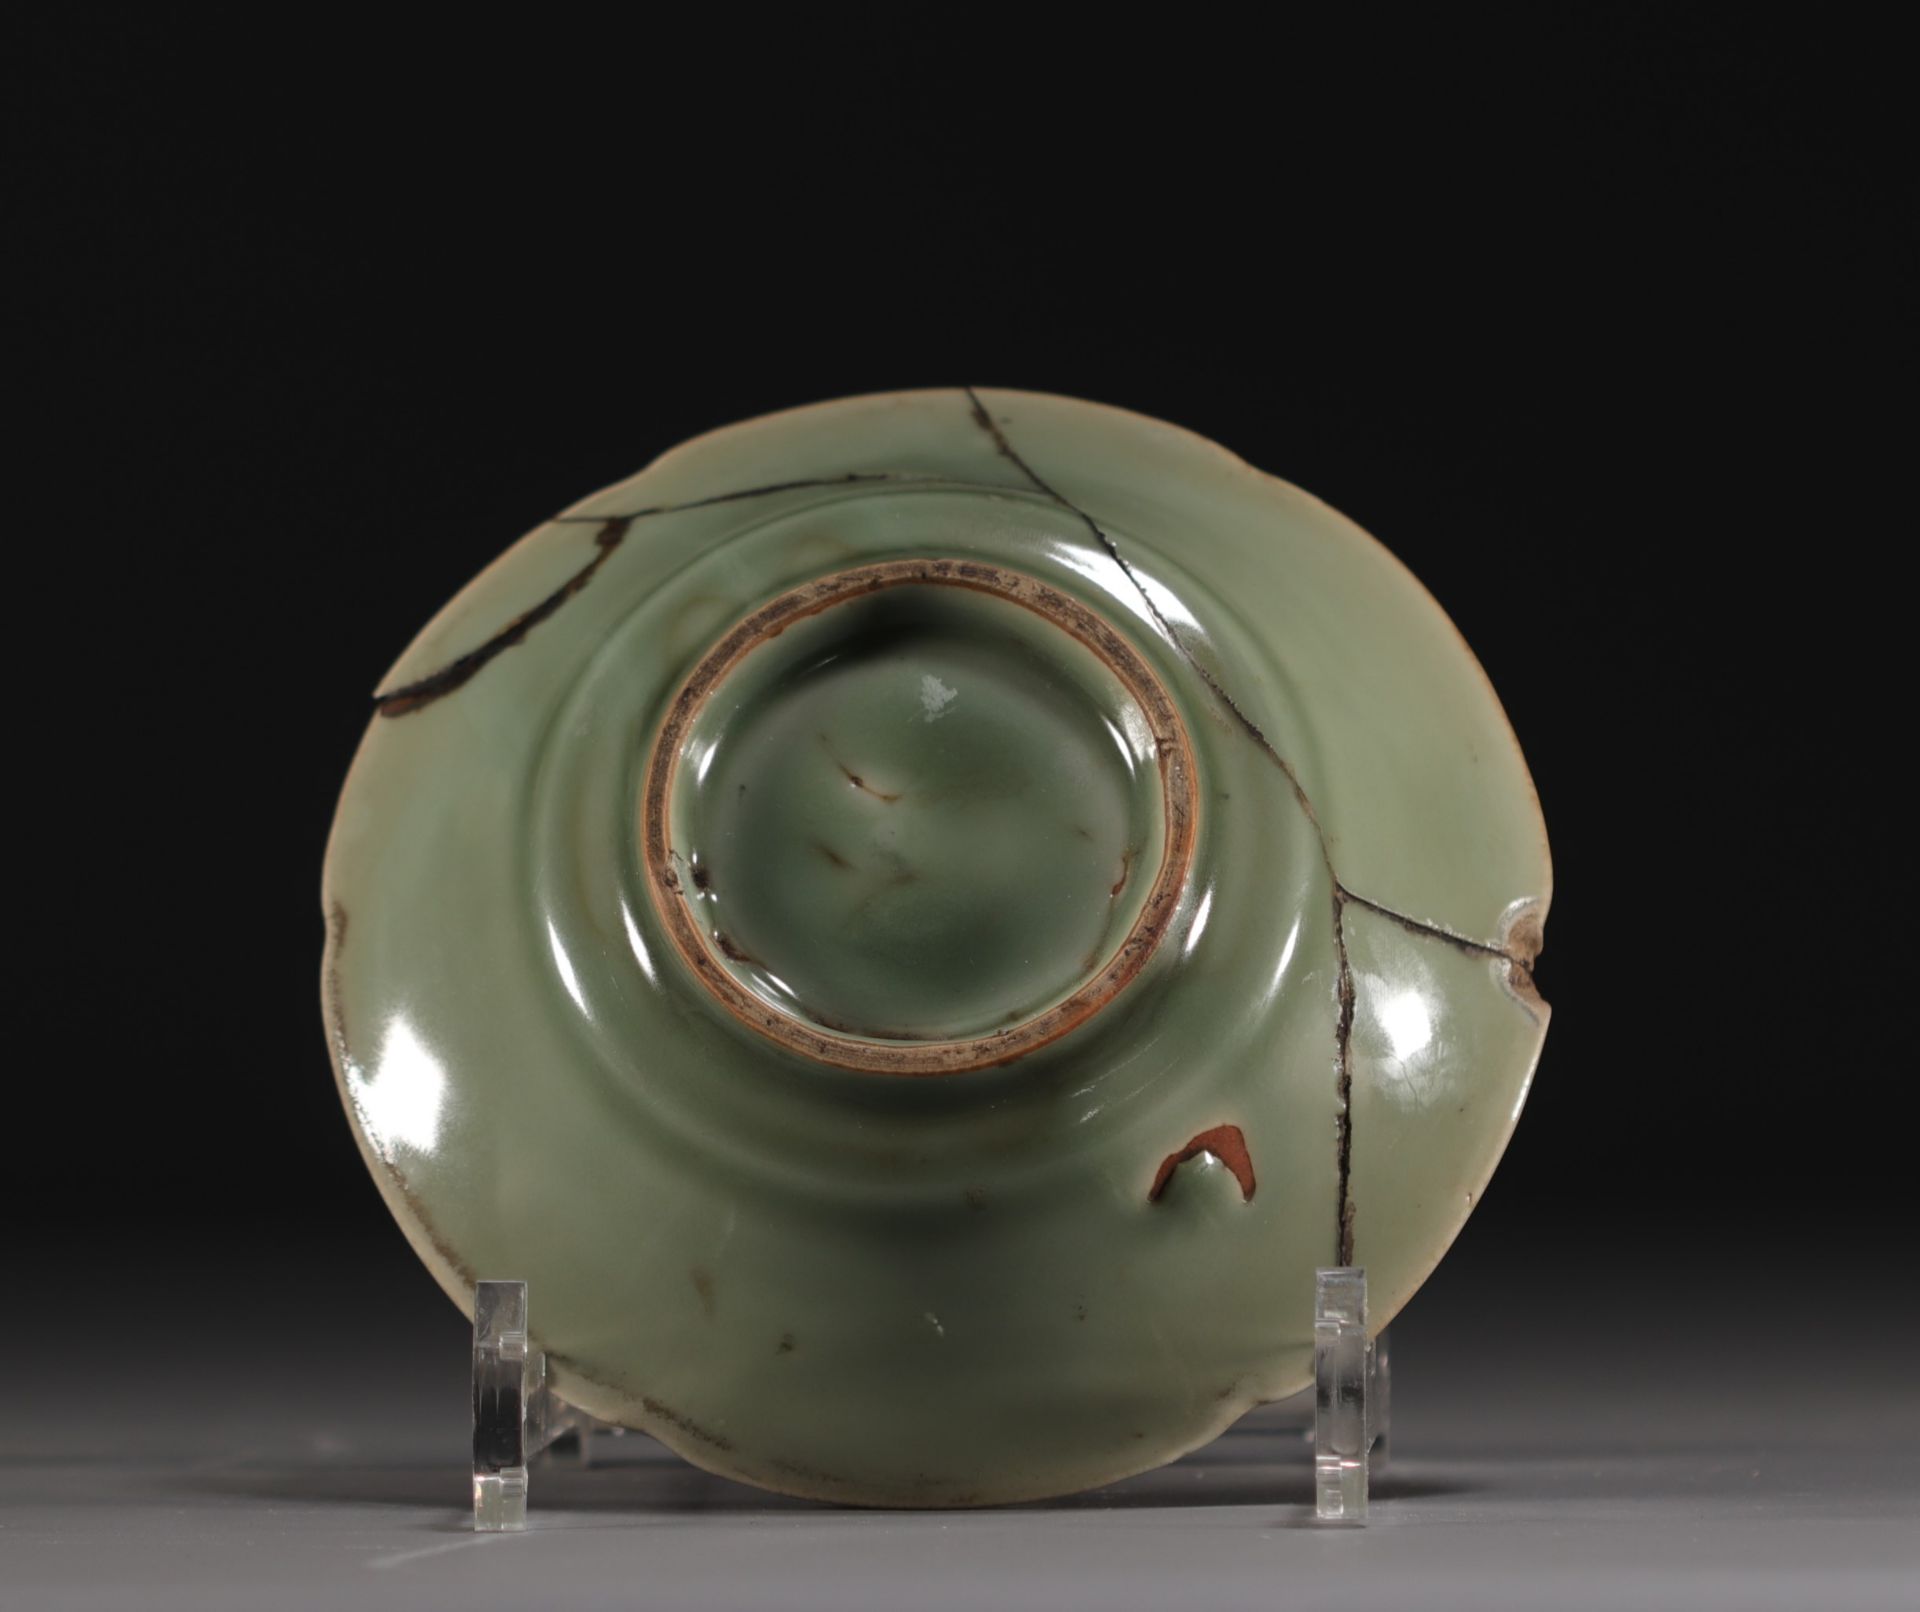 China - Celadon rimmed plate, Song period. - Image 3 of 3